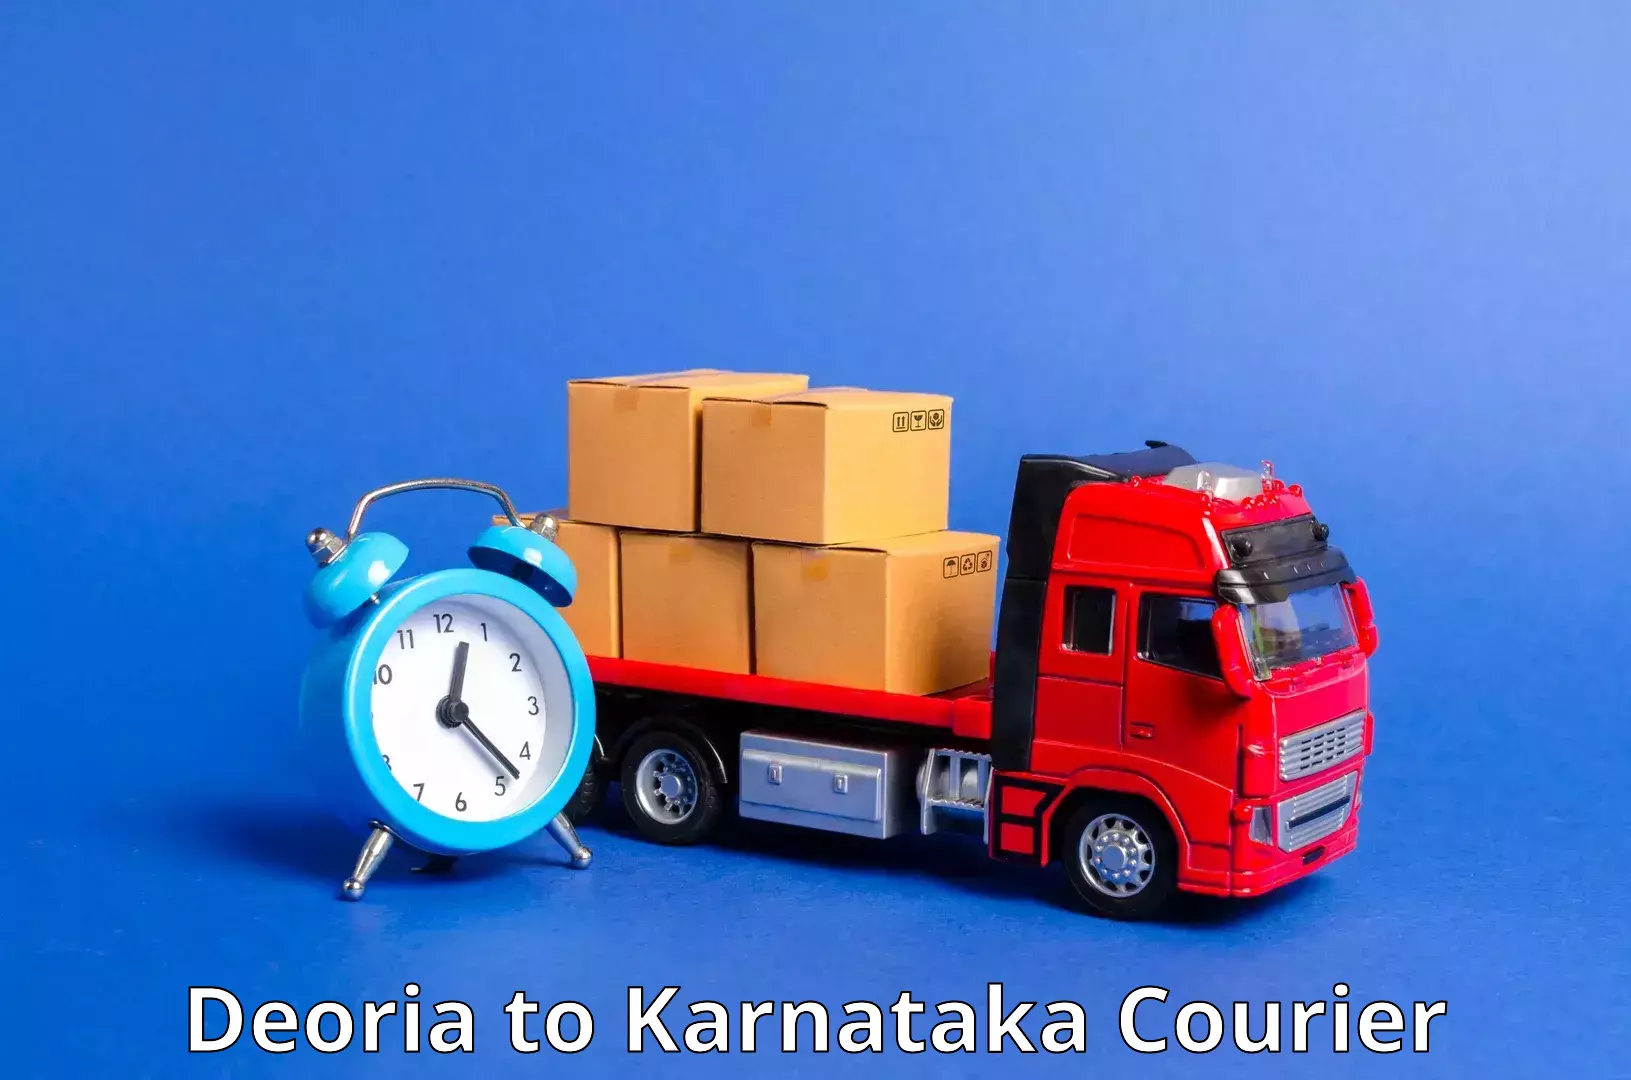 Rural area delivery Deoria to Chikkaballapur